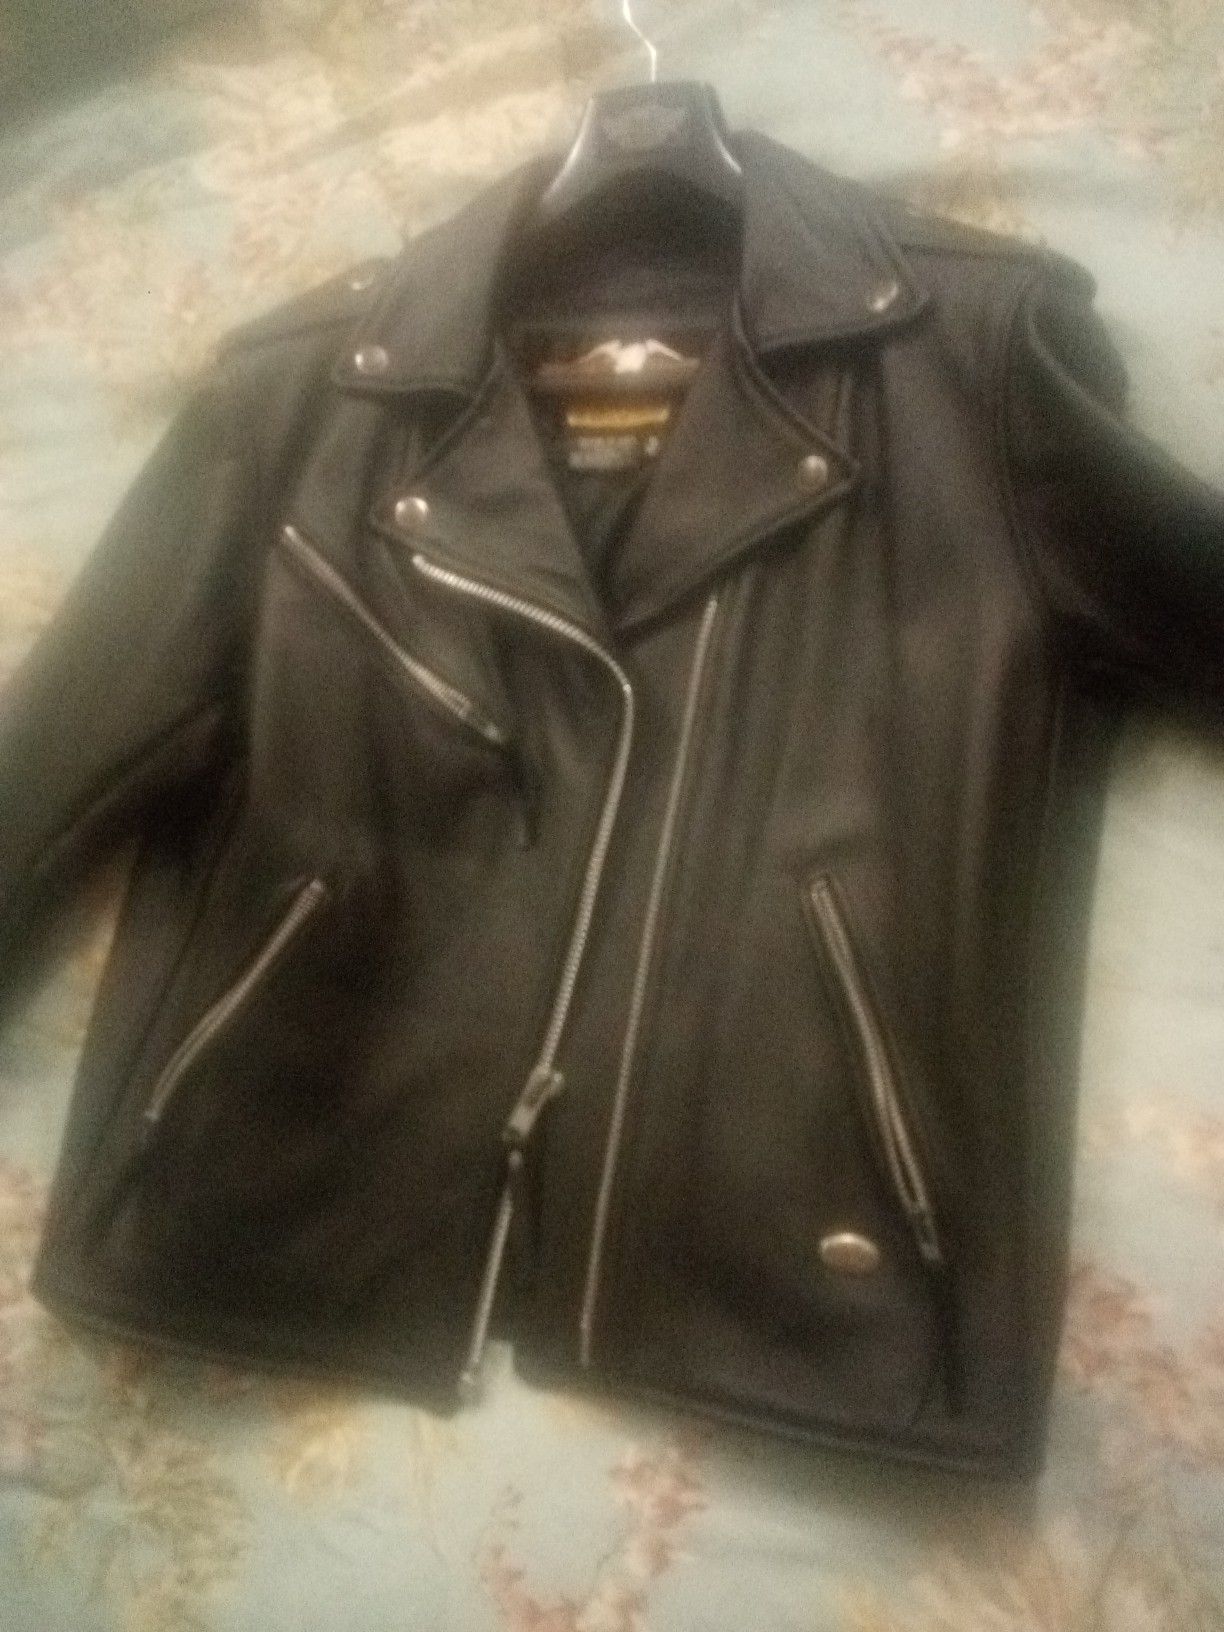 Harley Davidson women's leather biker jacket And Women's Harley Boots Size 8